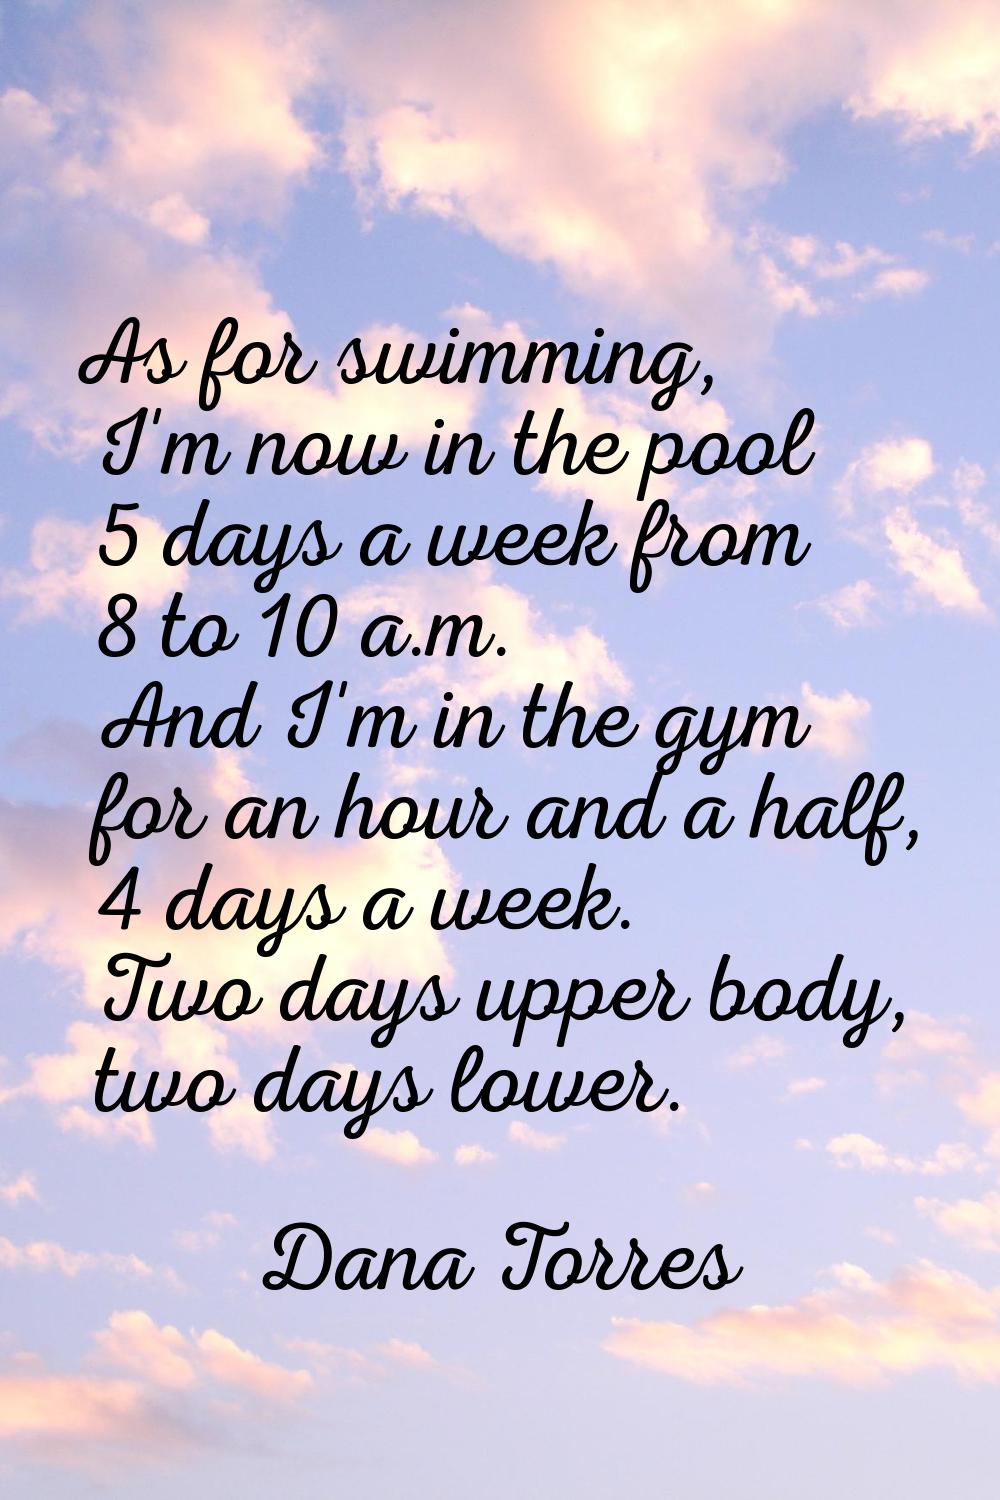 As for swimming, I'm now in the pool 5 days a week from 8 to 10 a.m. And I'm in the gym for an hour